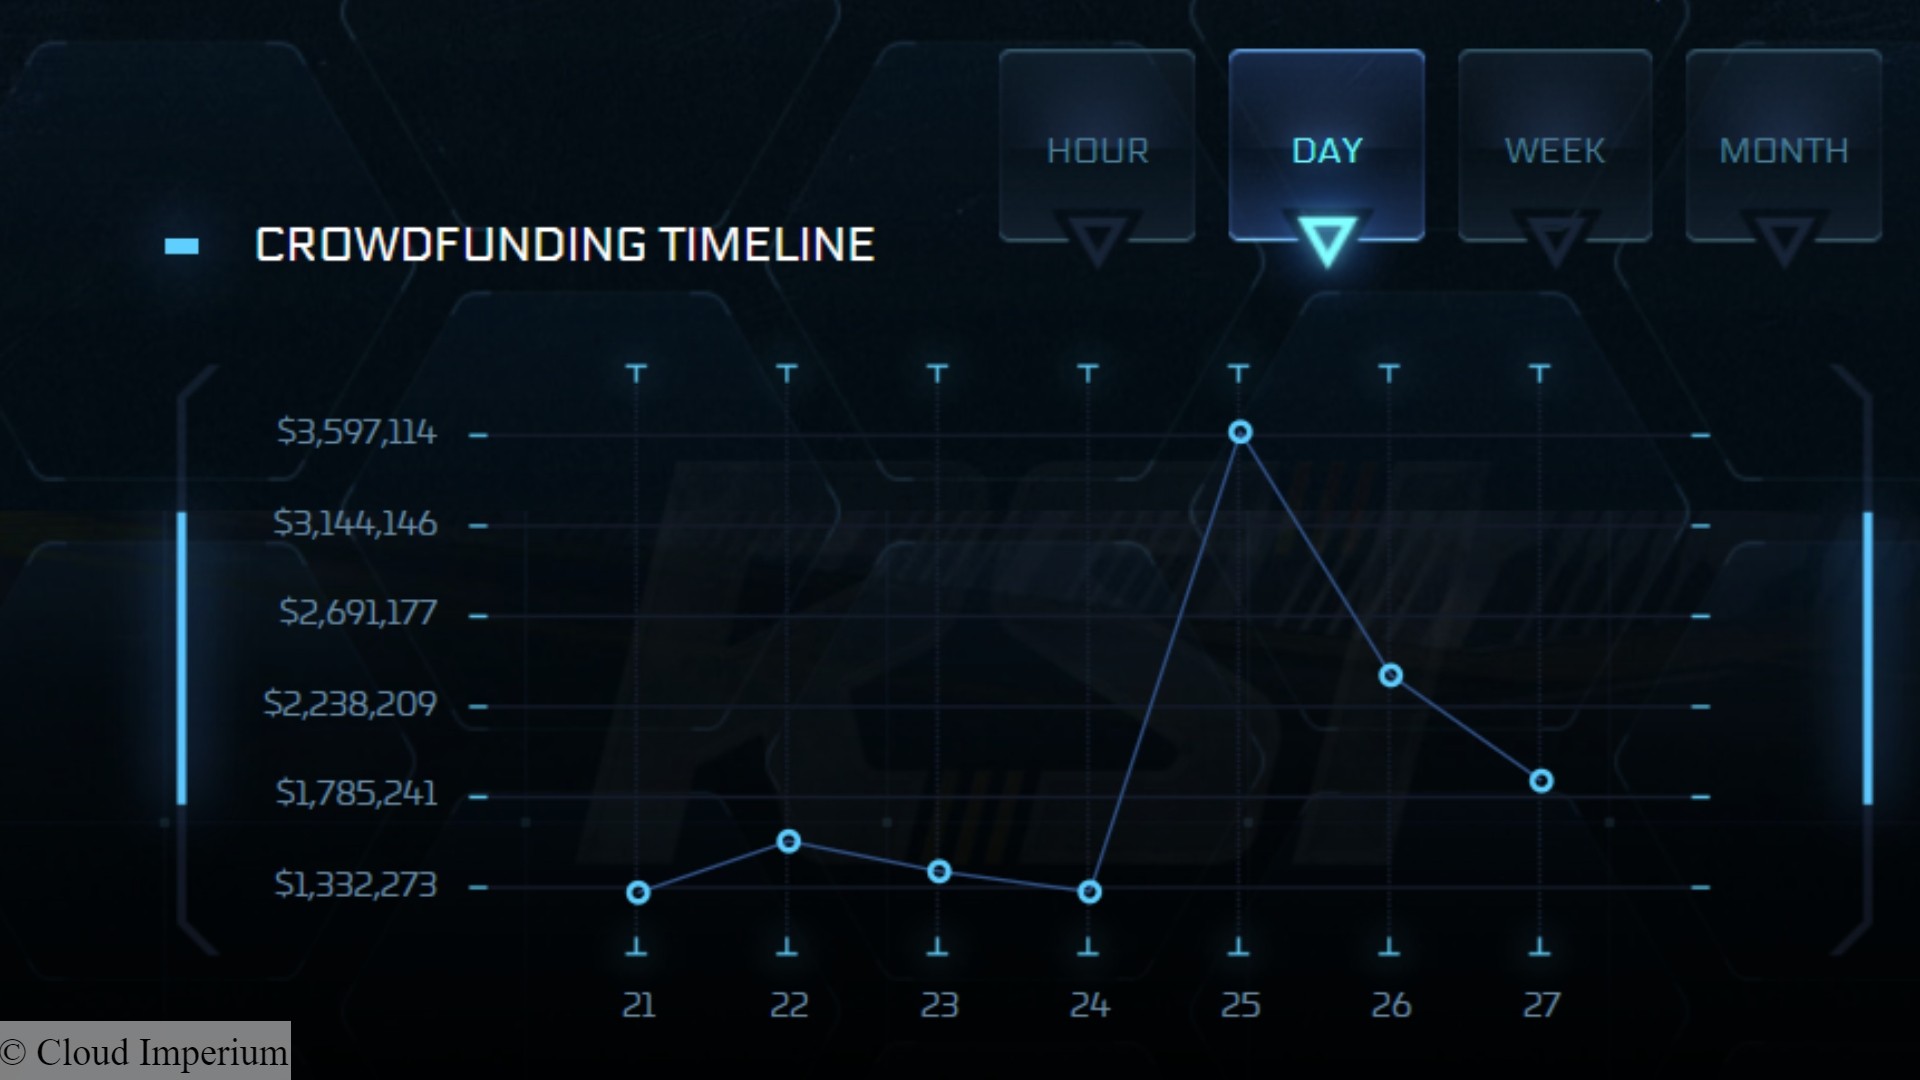 Star Citizen funding record: A graph showing funding for Cloud Imperium space game Star Citizen